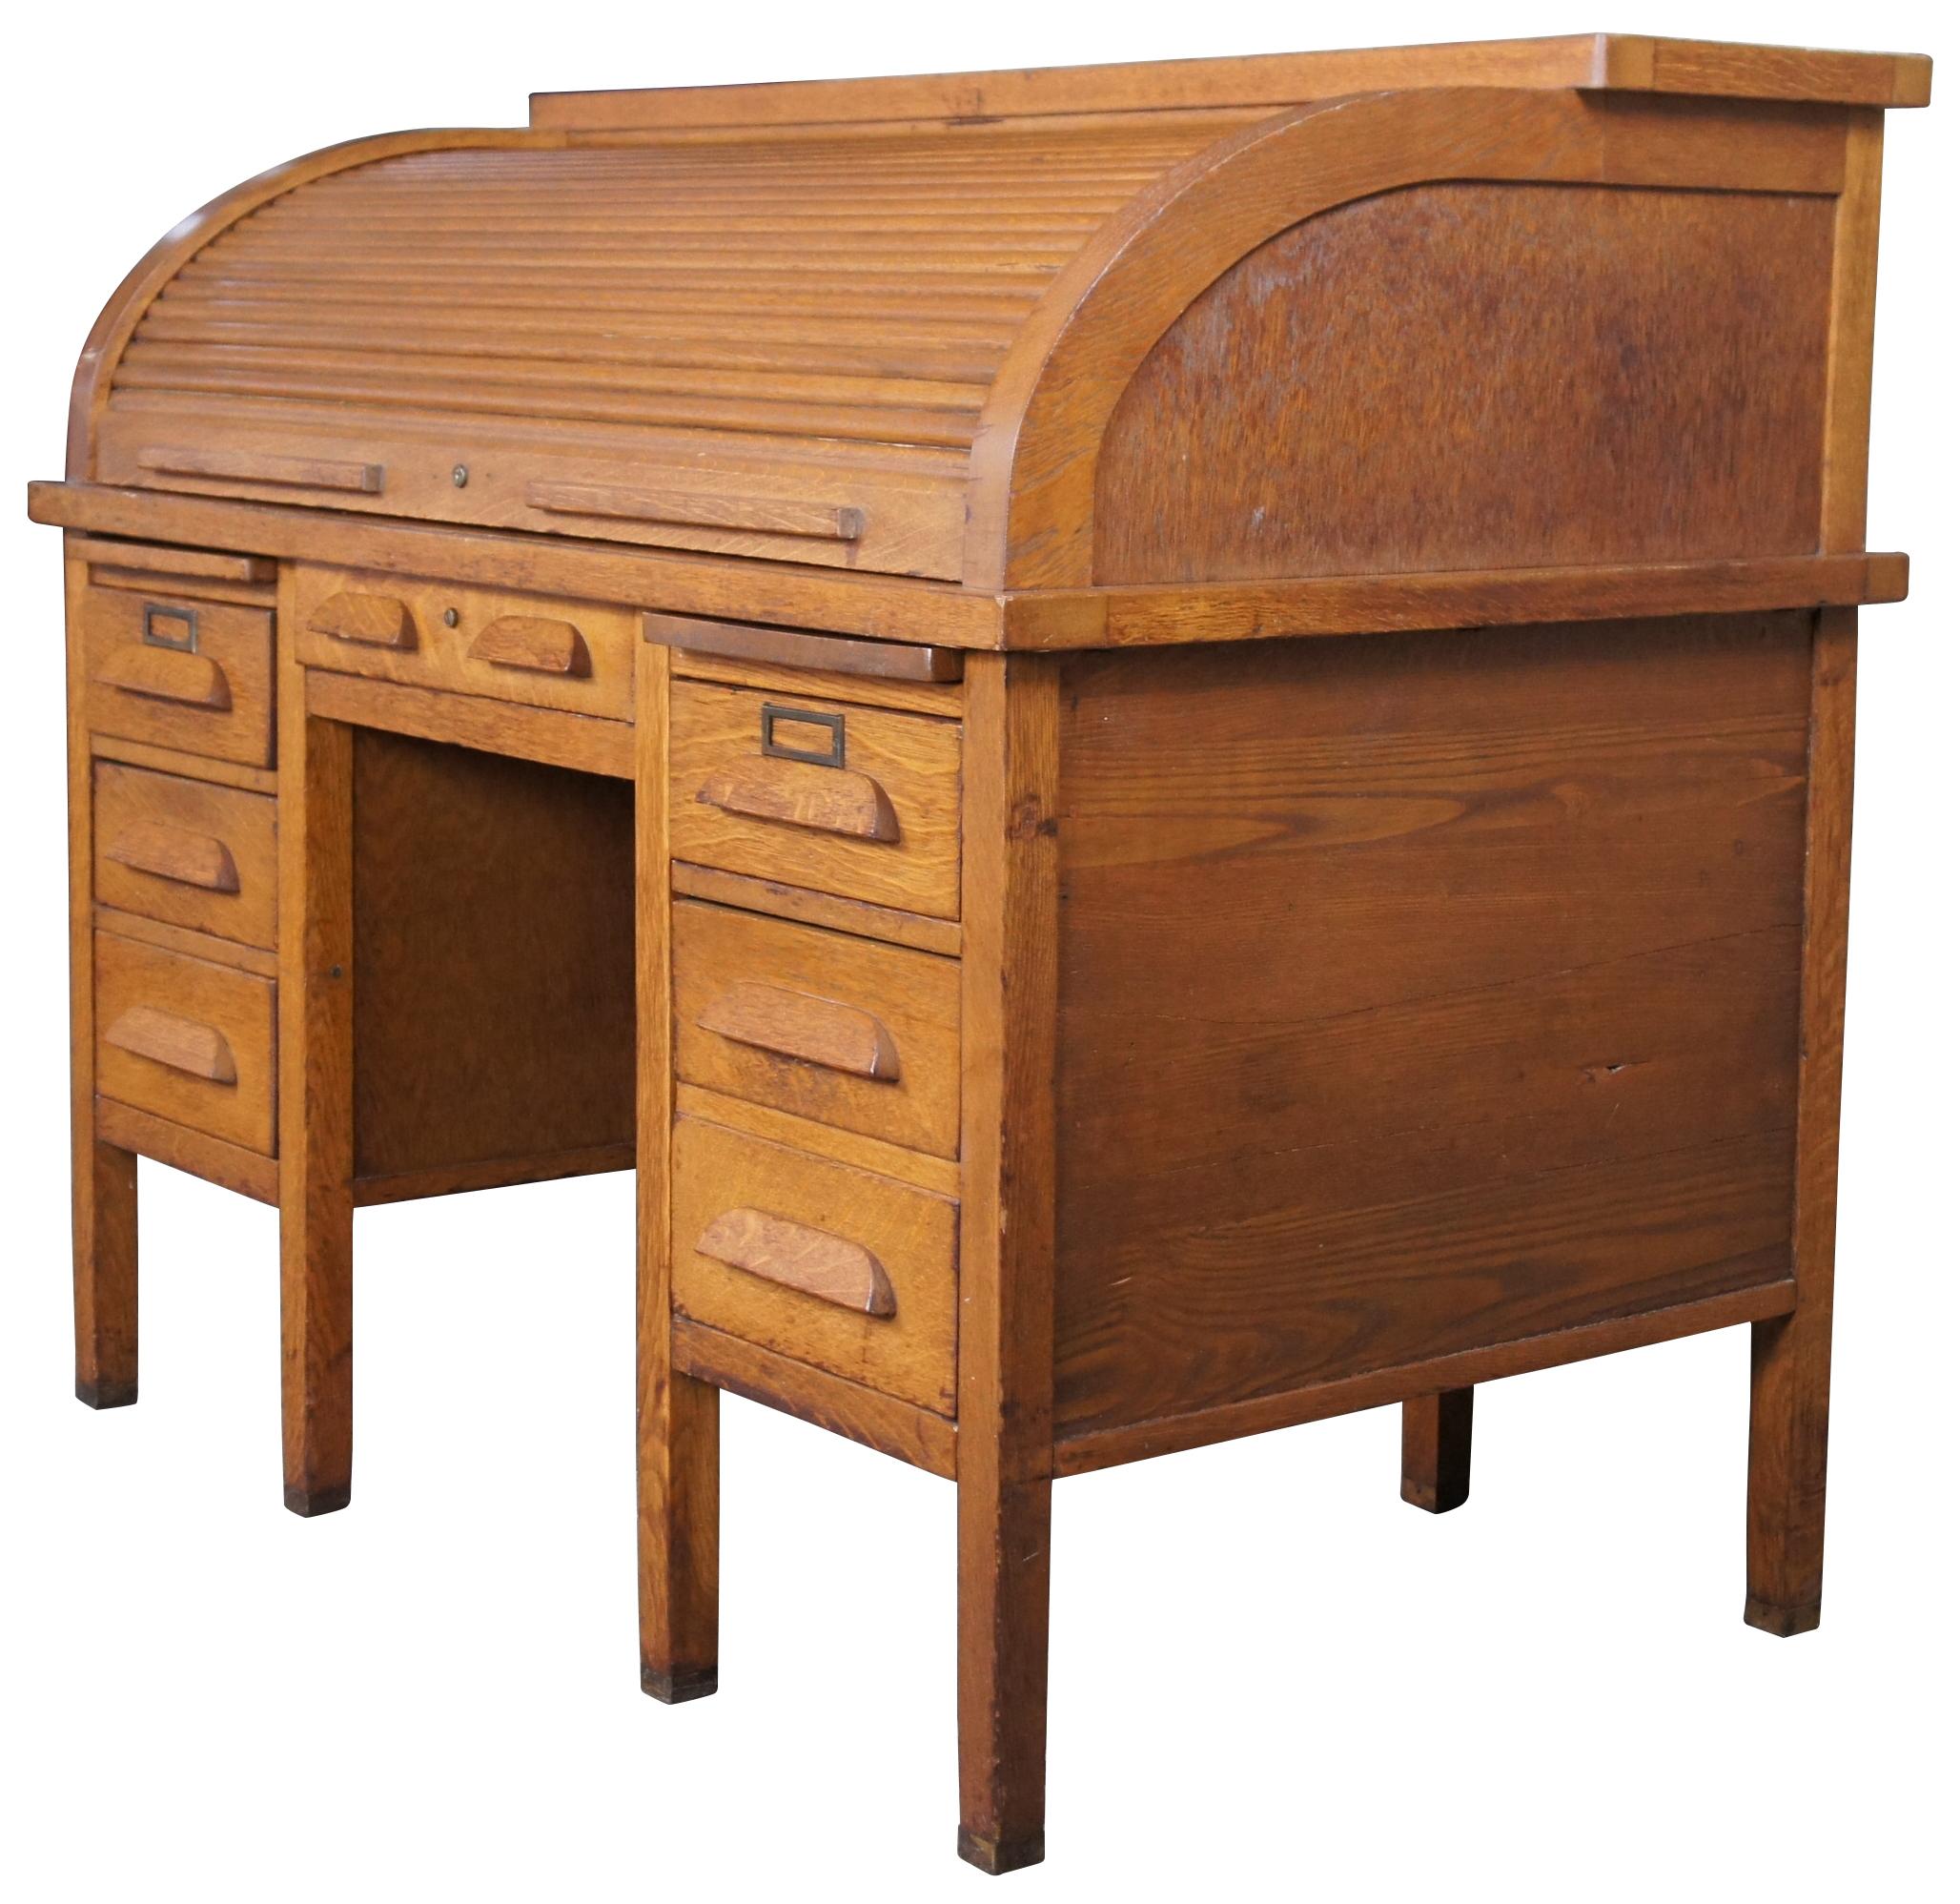 Early 20th century antique quartersawn oak C curve roll top desk. Features rectangular form with large lockable tambour door, six drawers, multiple letter / index / files / and cubbies. Includes brass capped feet. Measure: 44